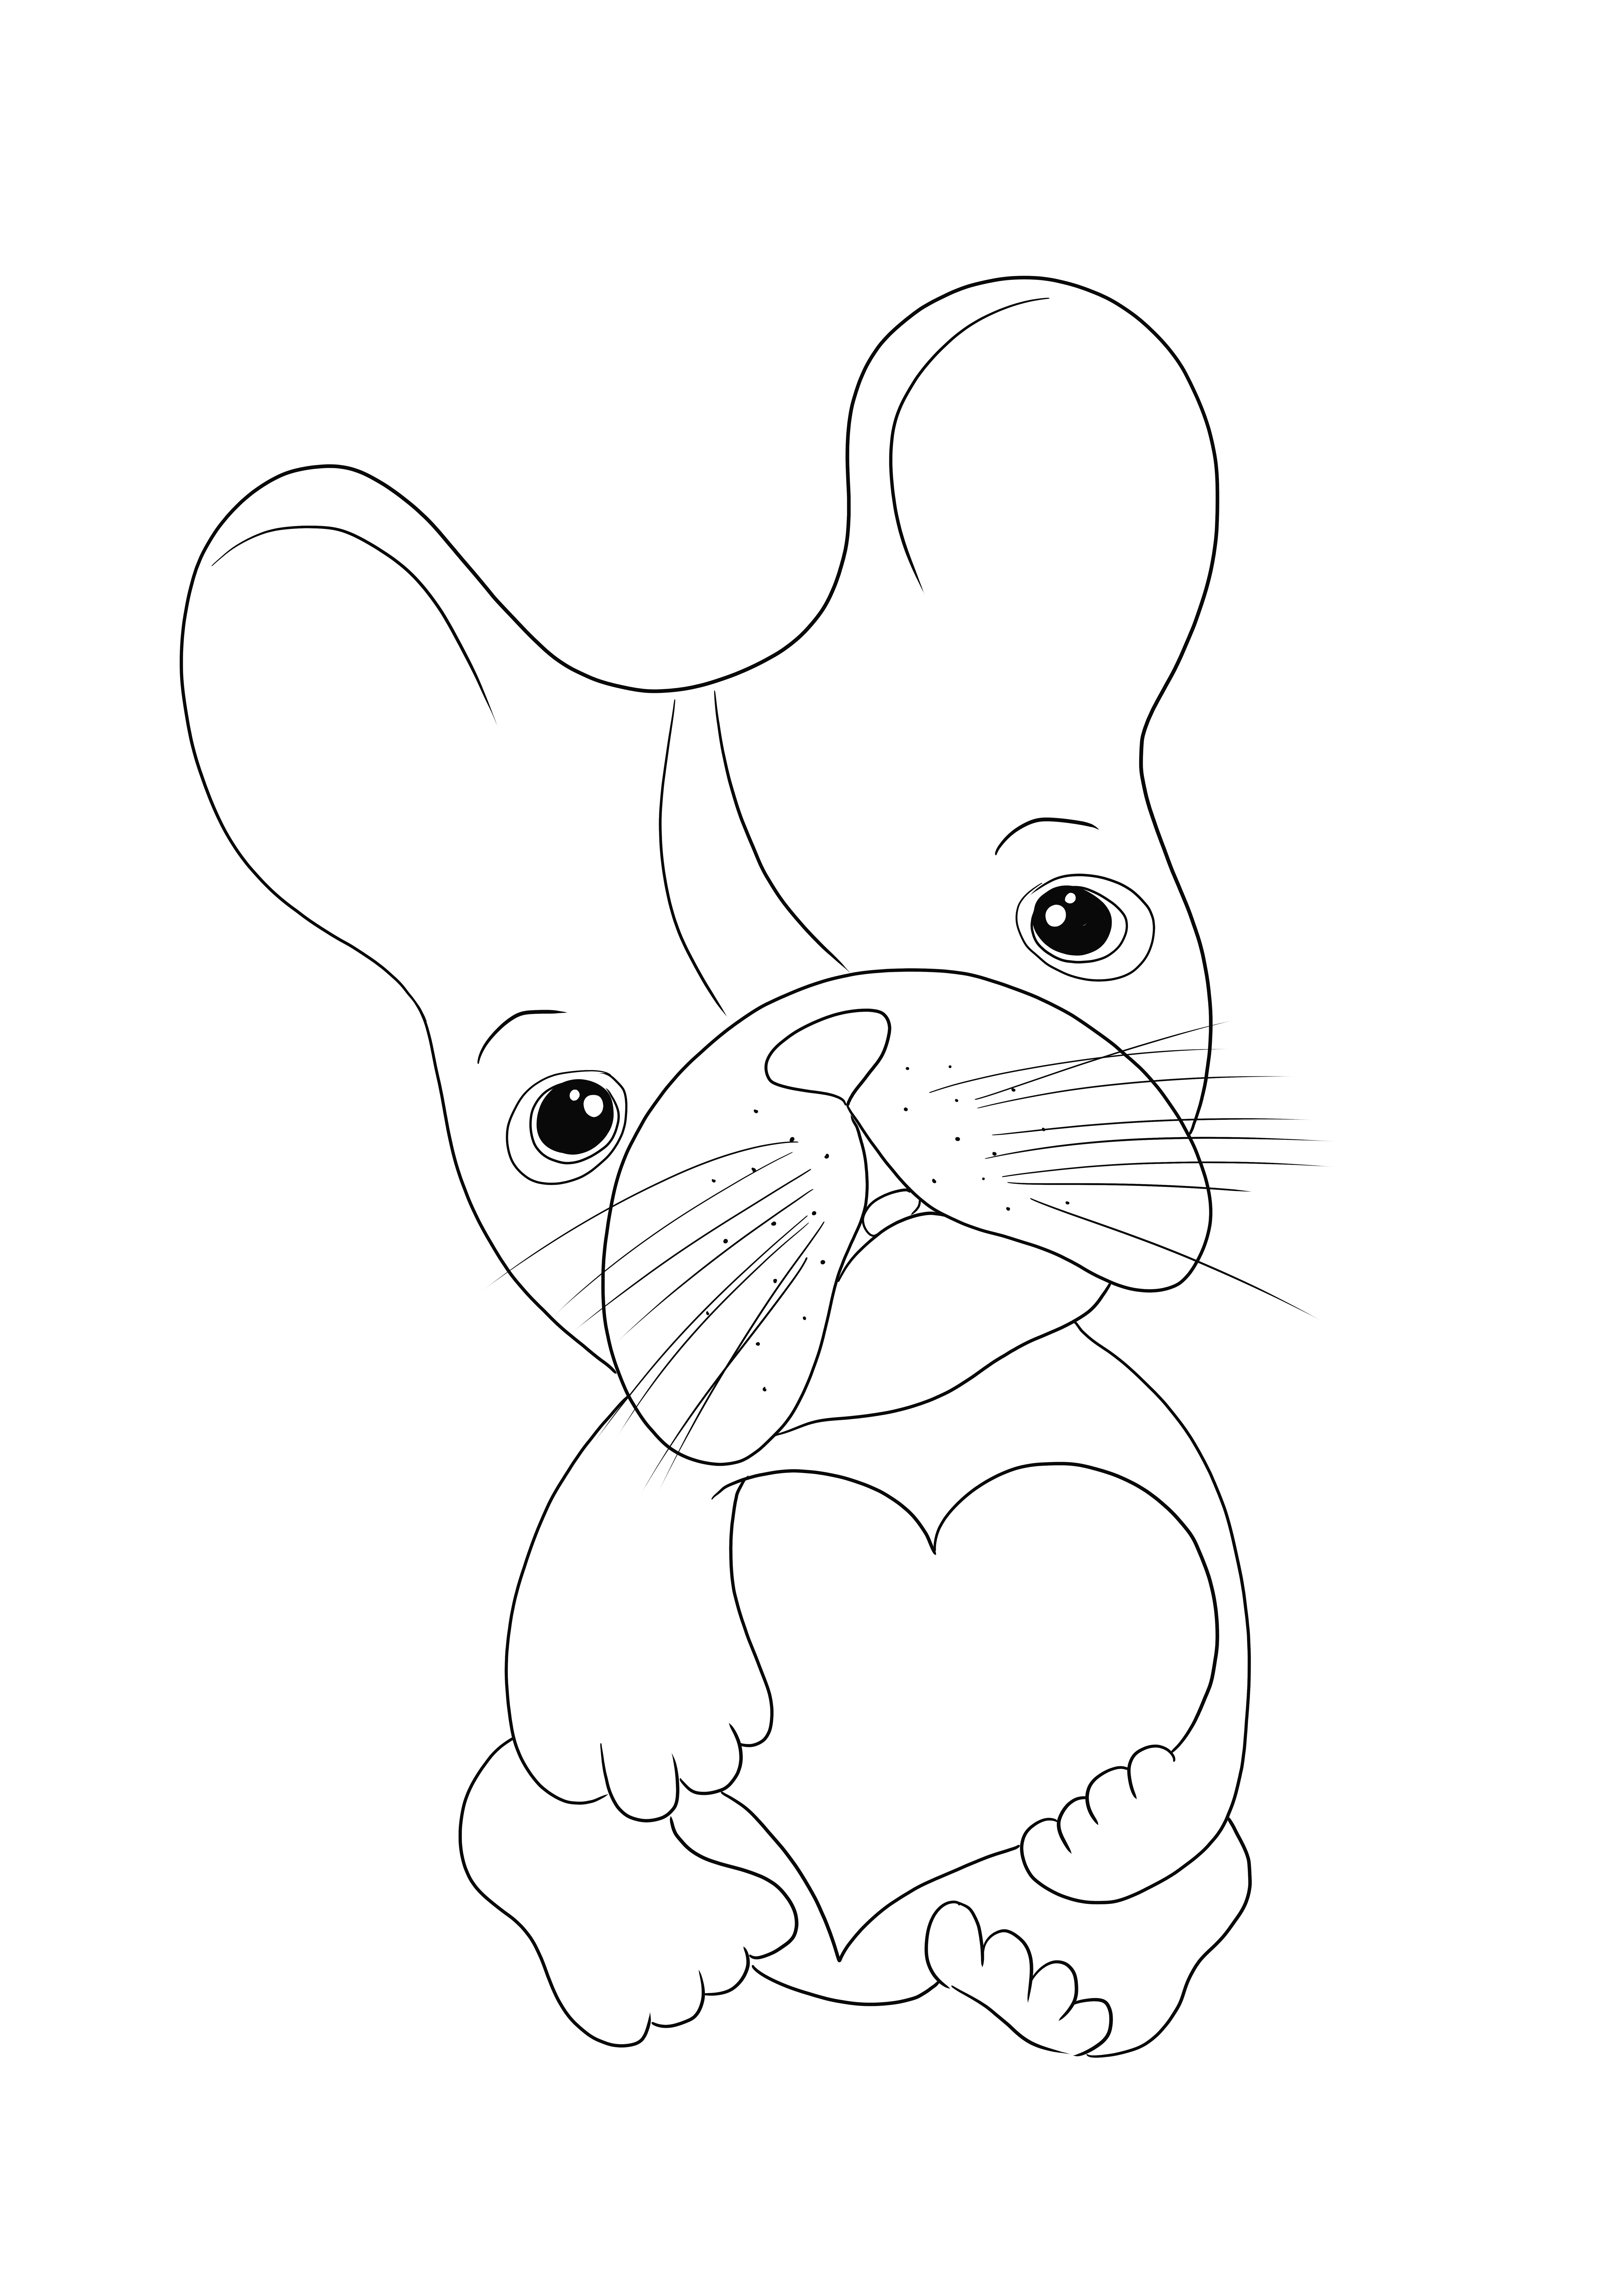 Cute Dog with Heart printing or downloading image for free to color